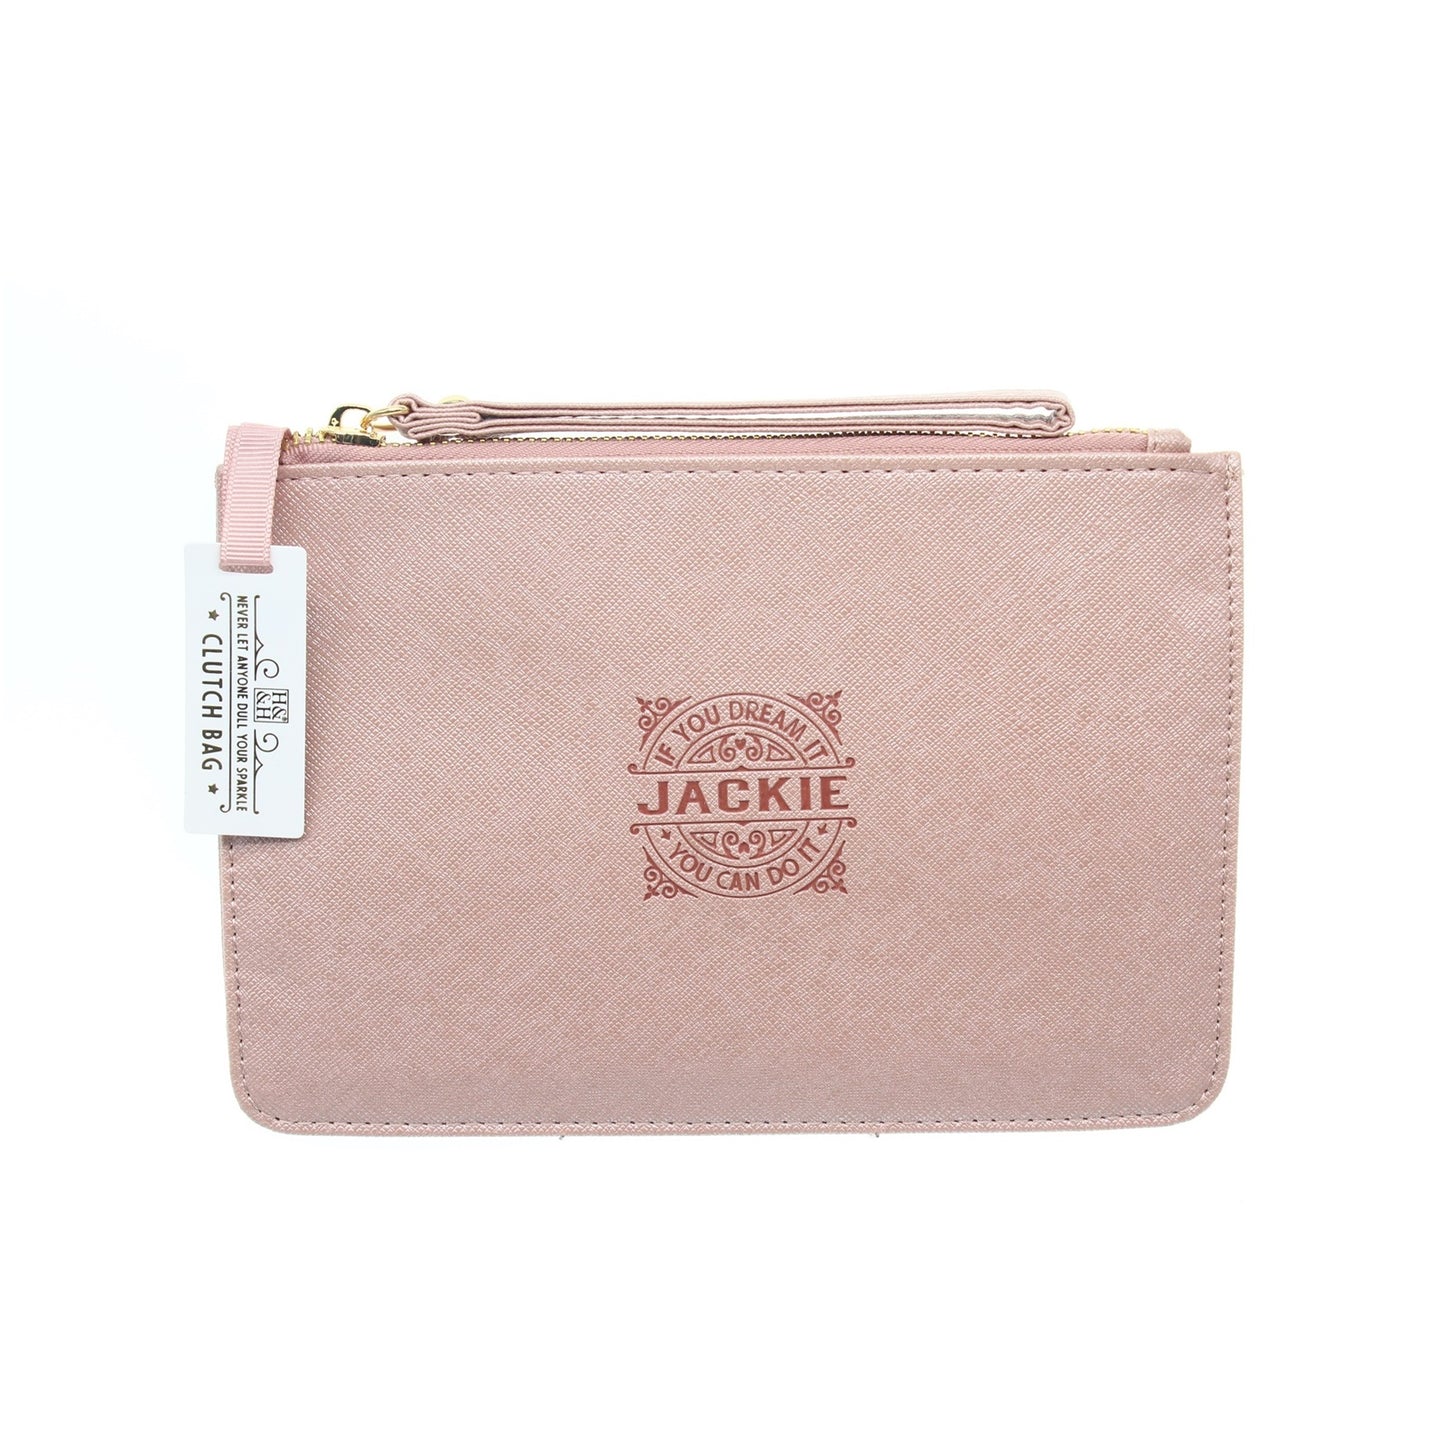 Clutch Bag With Handle & Embossed Text "Jackie"